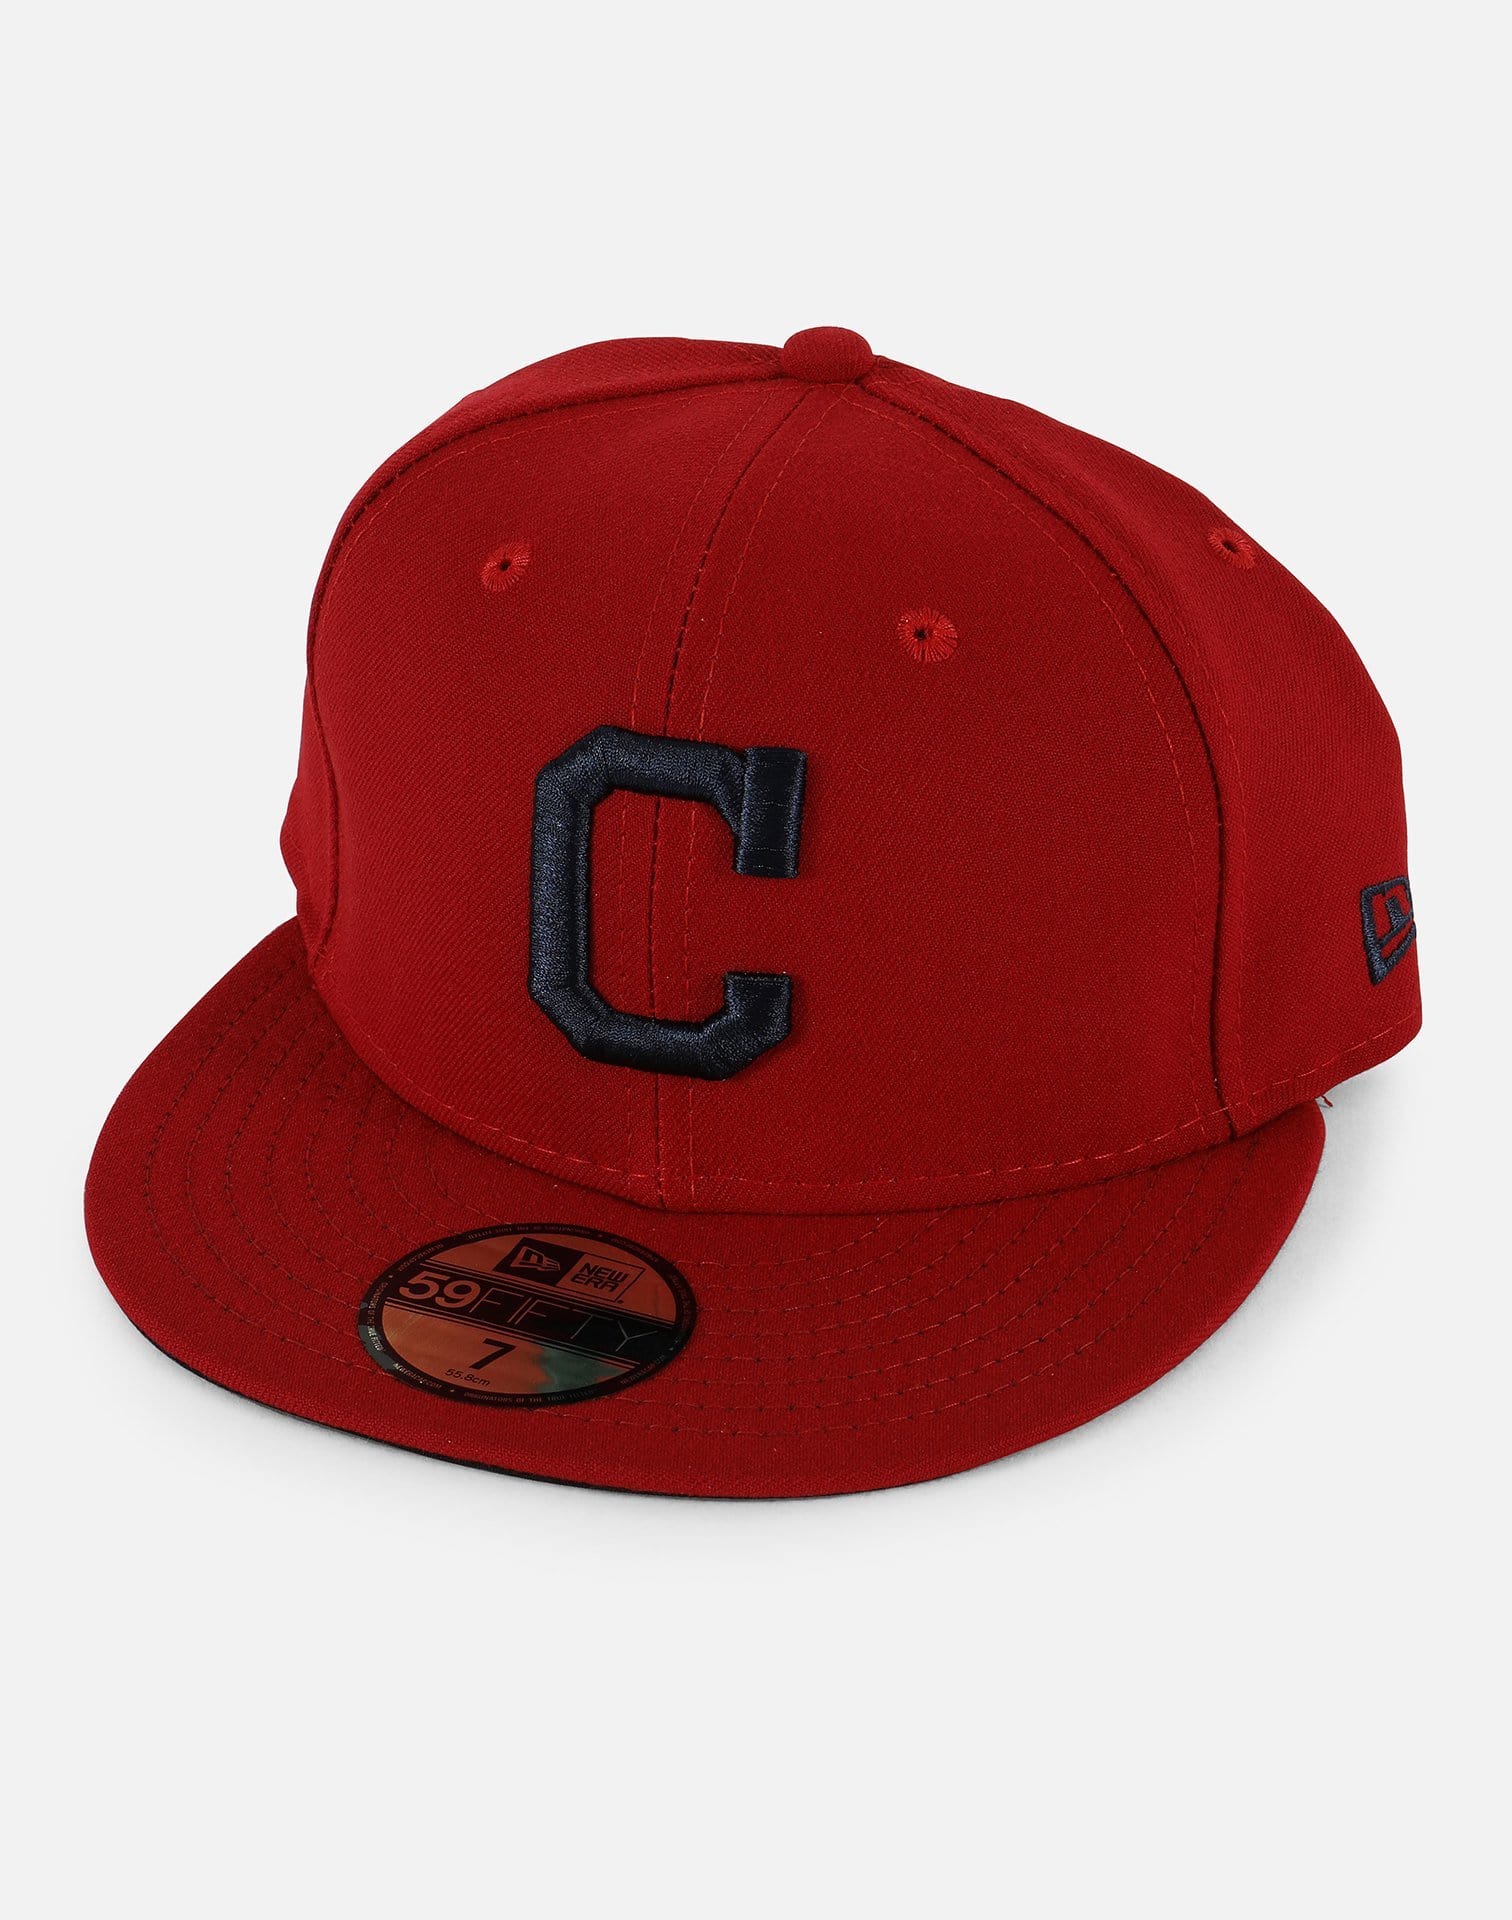 New Era MLB Cleveland Indians Alternative Fitted Hat